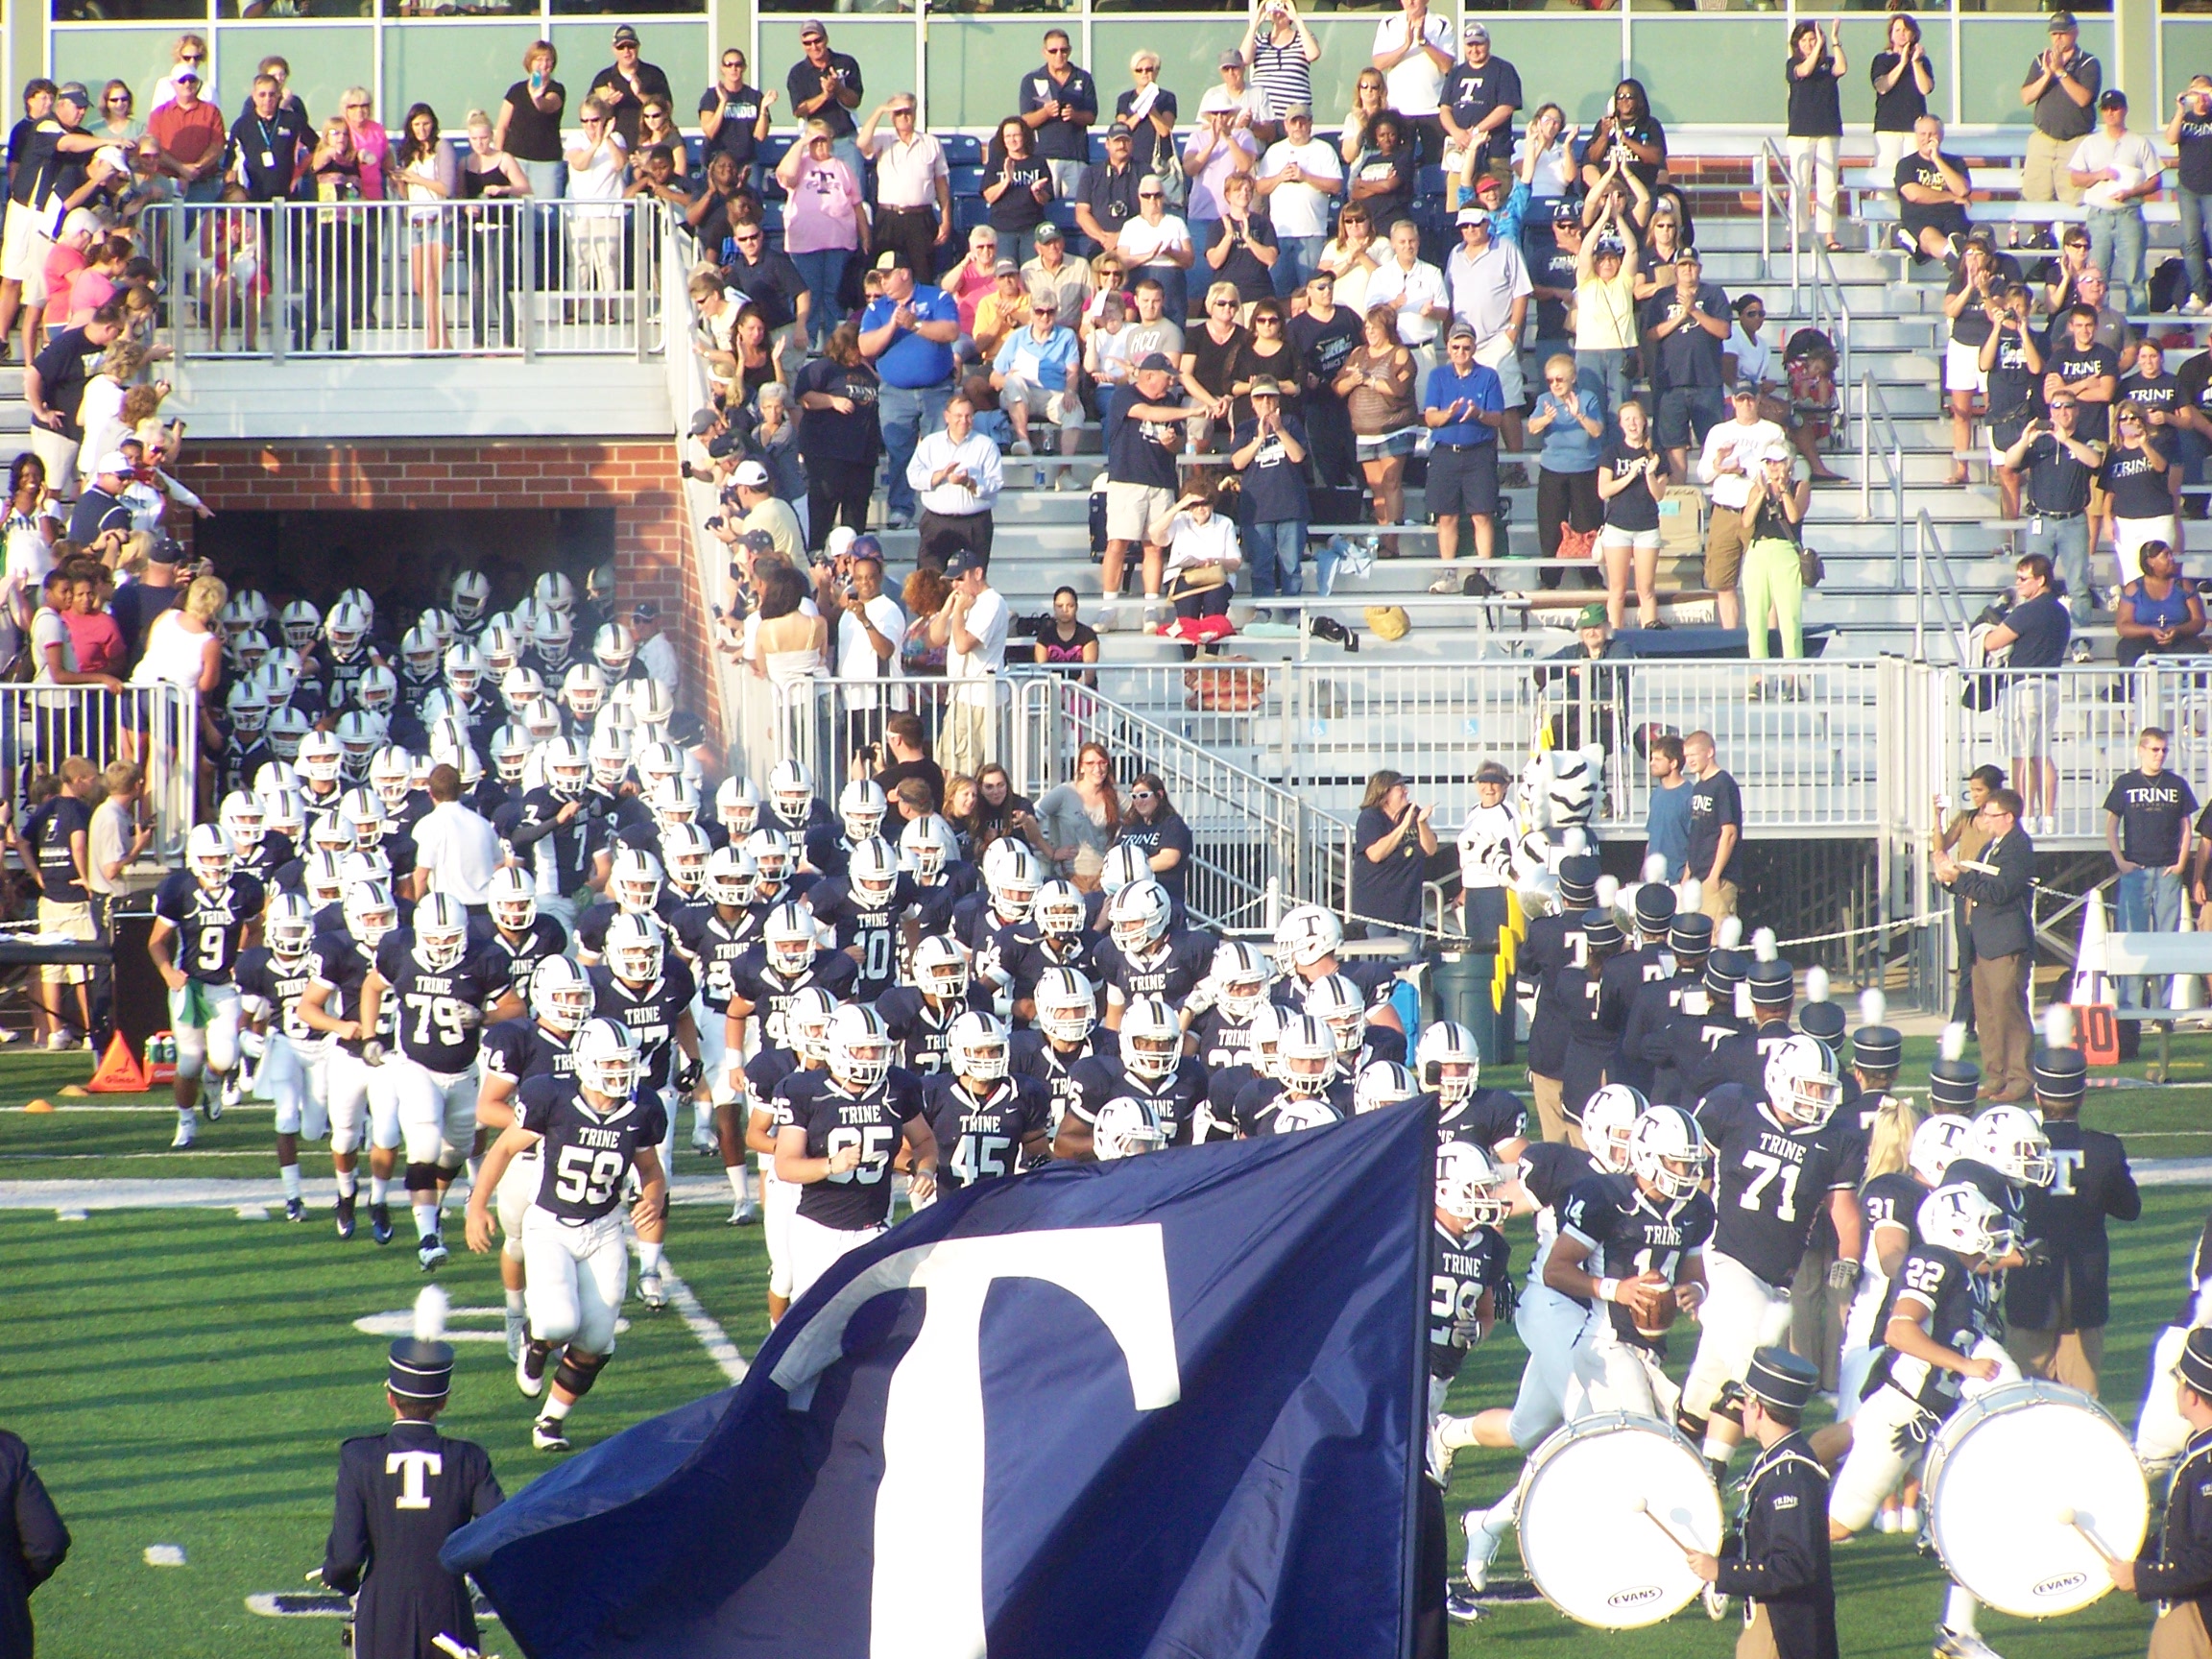 Electrifying Kickoff Return Leads Trine to Season Opening Victory